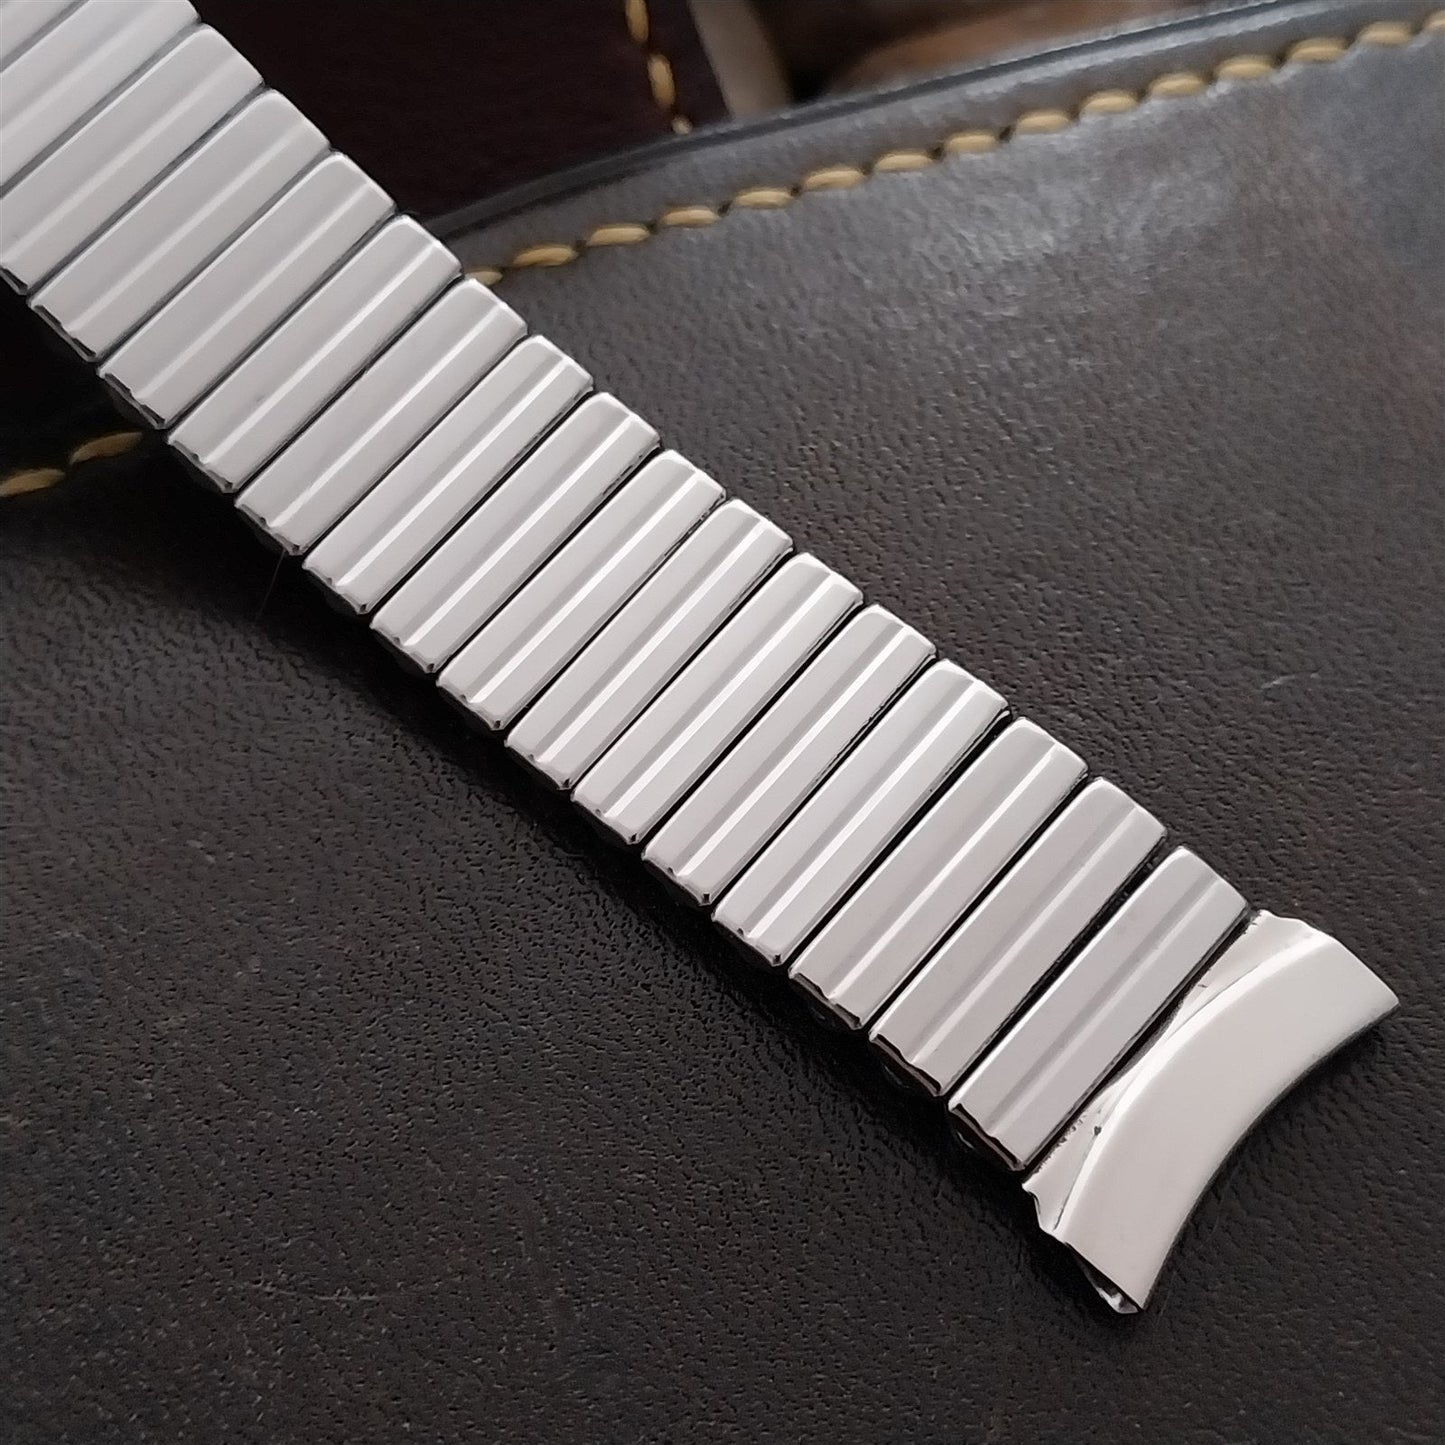 17mm 16mm 1950s-1960s Airflex Stainless Steel Classic Unused Vintage Watch Band